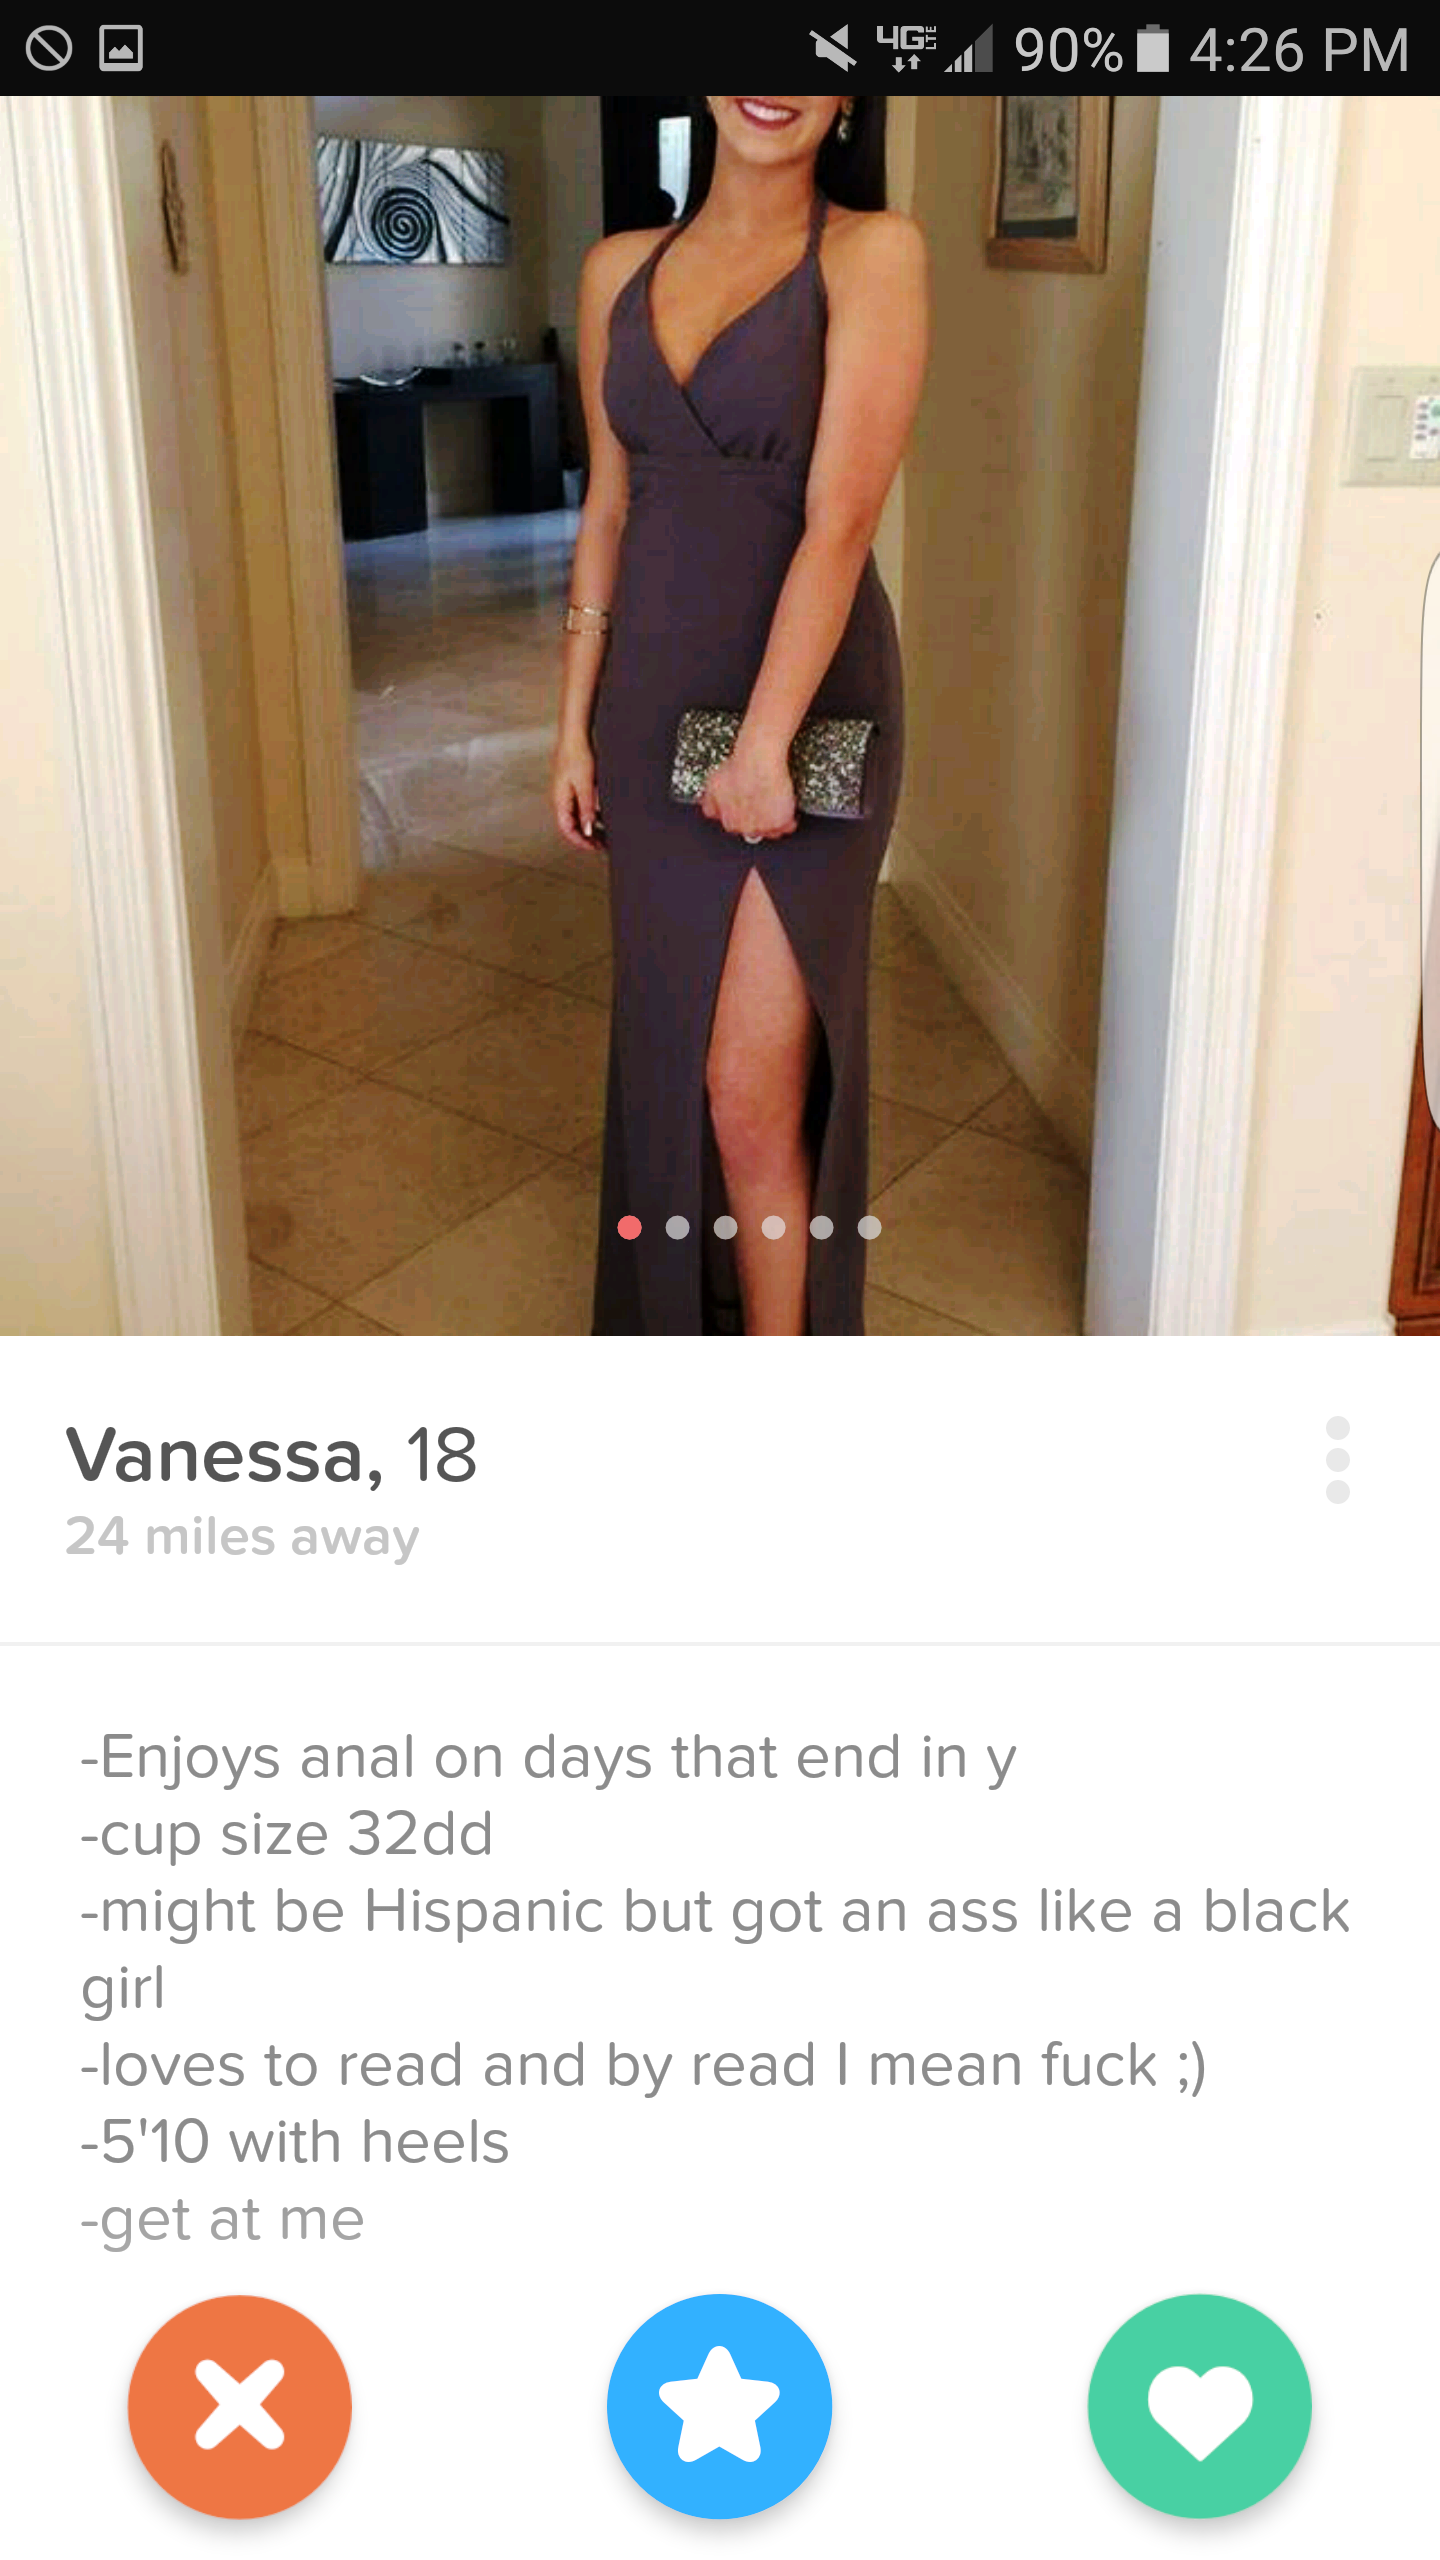 bio for sugar baby - 9.90% Vanessa, 18 24 miles away Enjoys anal on days that end in y cup size 32dd might be Hispanic but got an ass a black girl loves to read and by read I mean fuck 5'10 with heels get at me